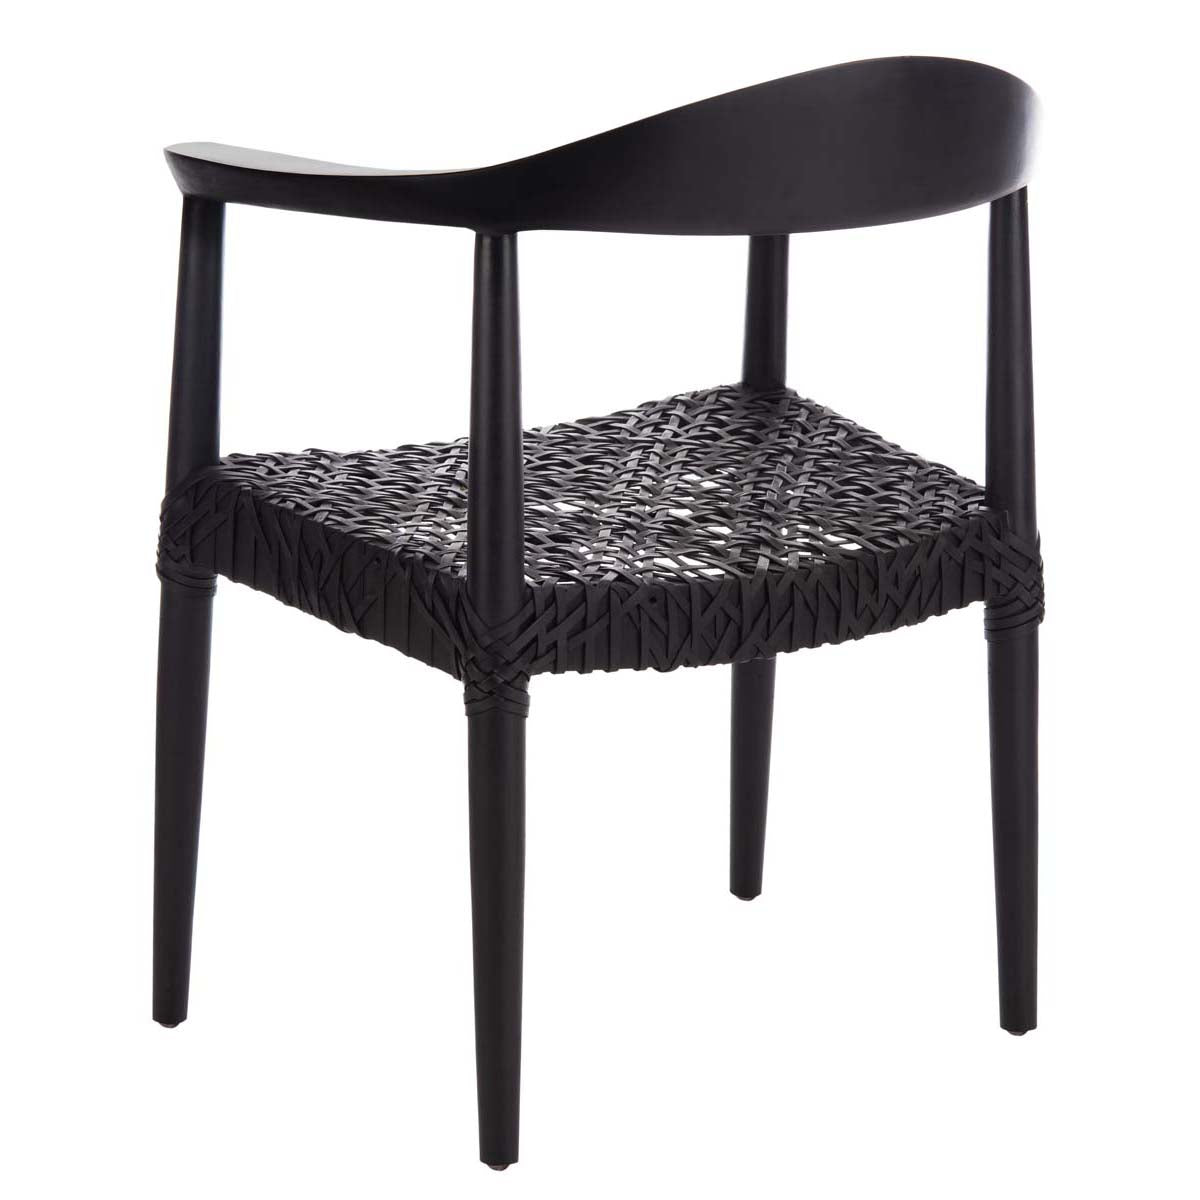 Safavieh Juneau Leather Woven Accent Chair , ACH1003 - Black Mindi Wood/Black Leather